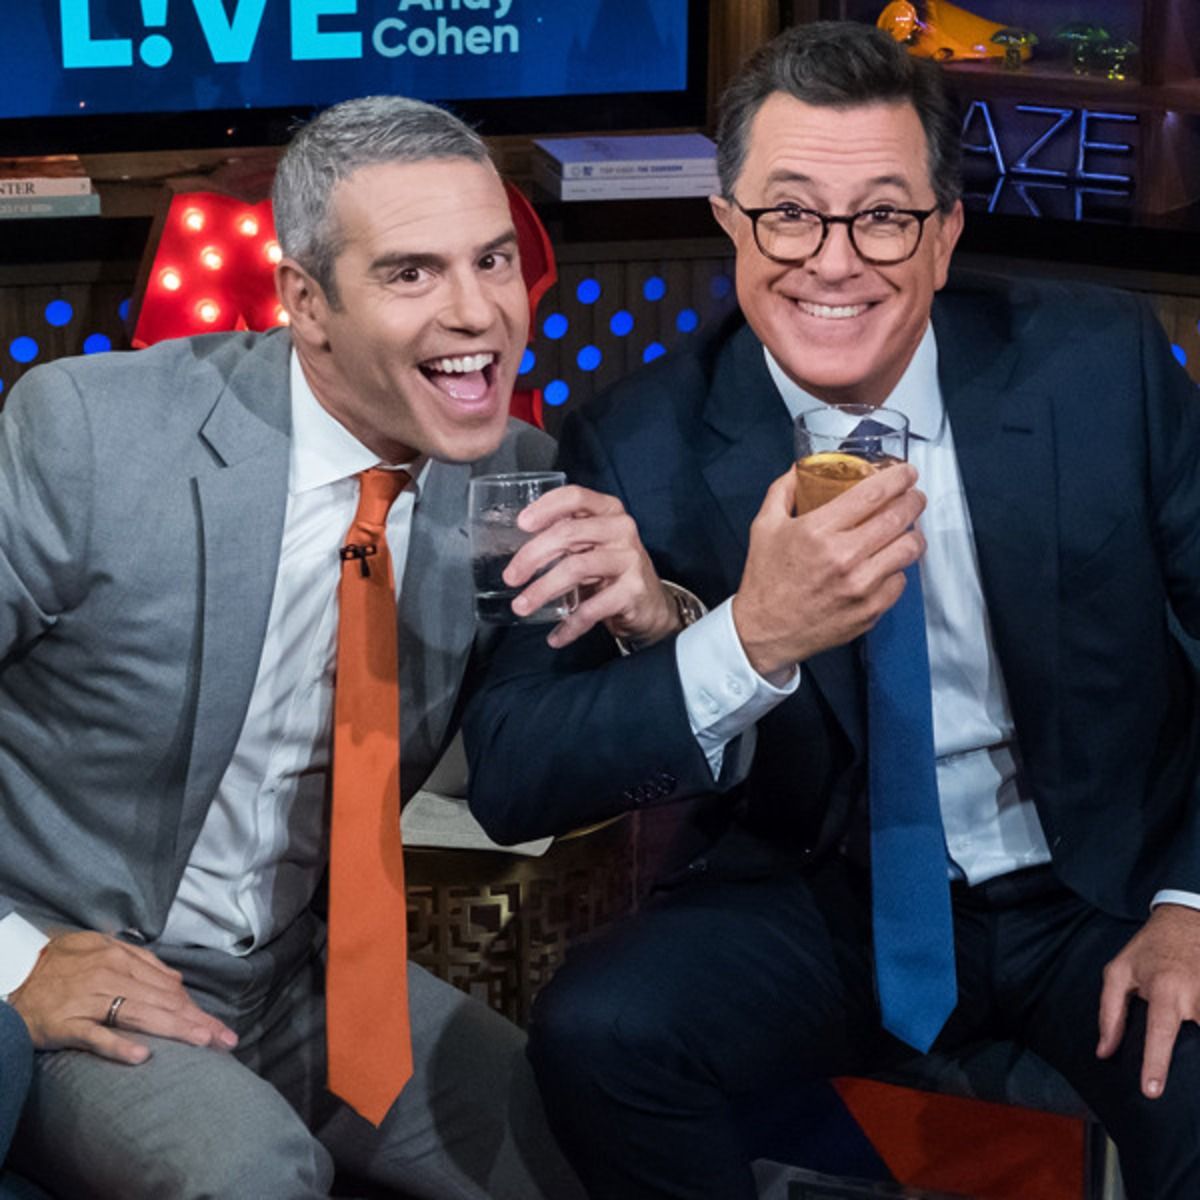 Andy Cohen and Stephen Colbert